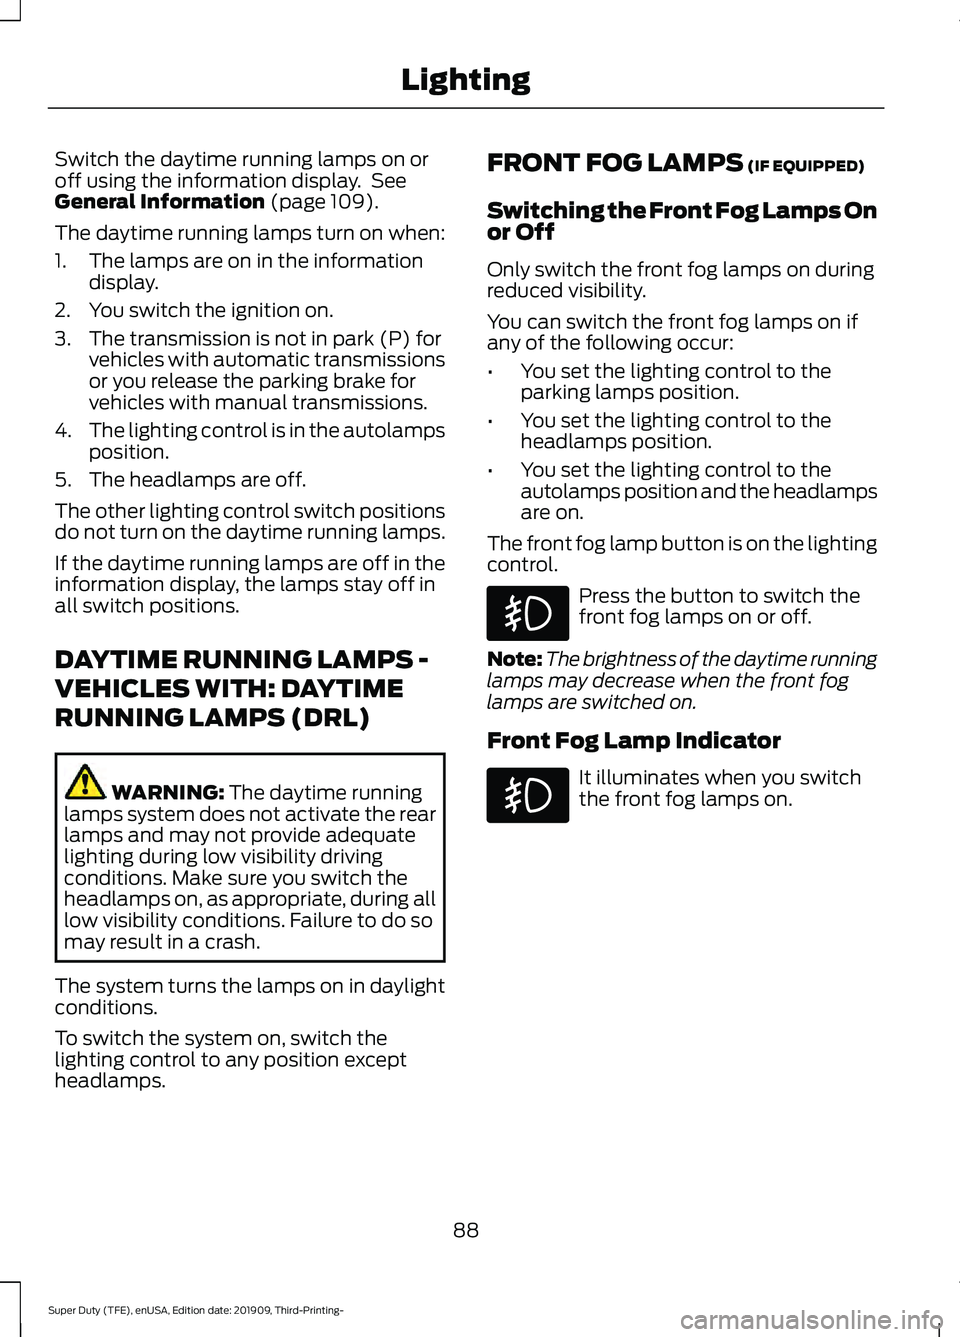 FORD F-550 2020  Owners Manual Switch the daytime running lamps on or
off using the information display.  See
General Information (page 109).
The daytime running lamps turn on when:
1. The lamps are on in the information display.
2